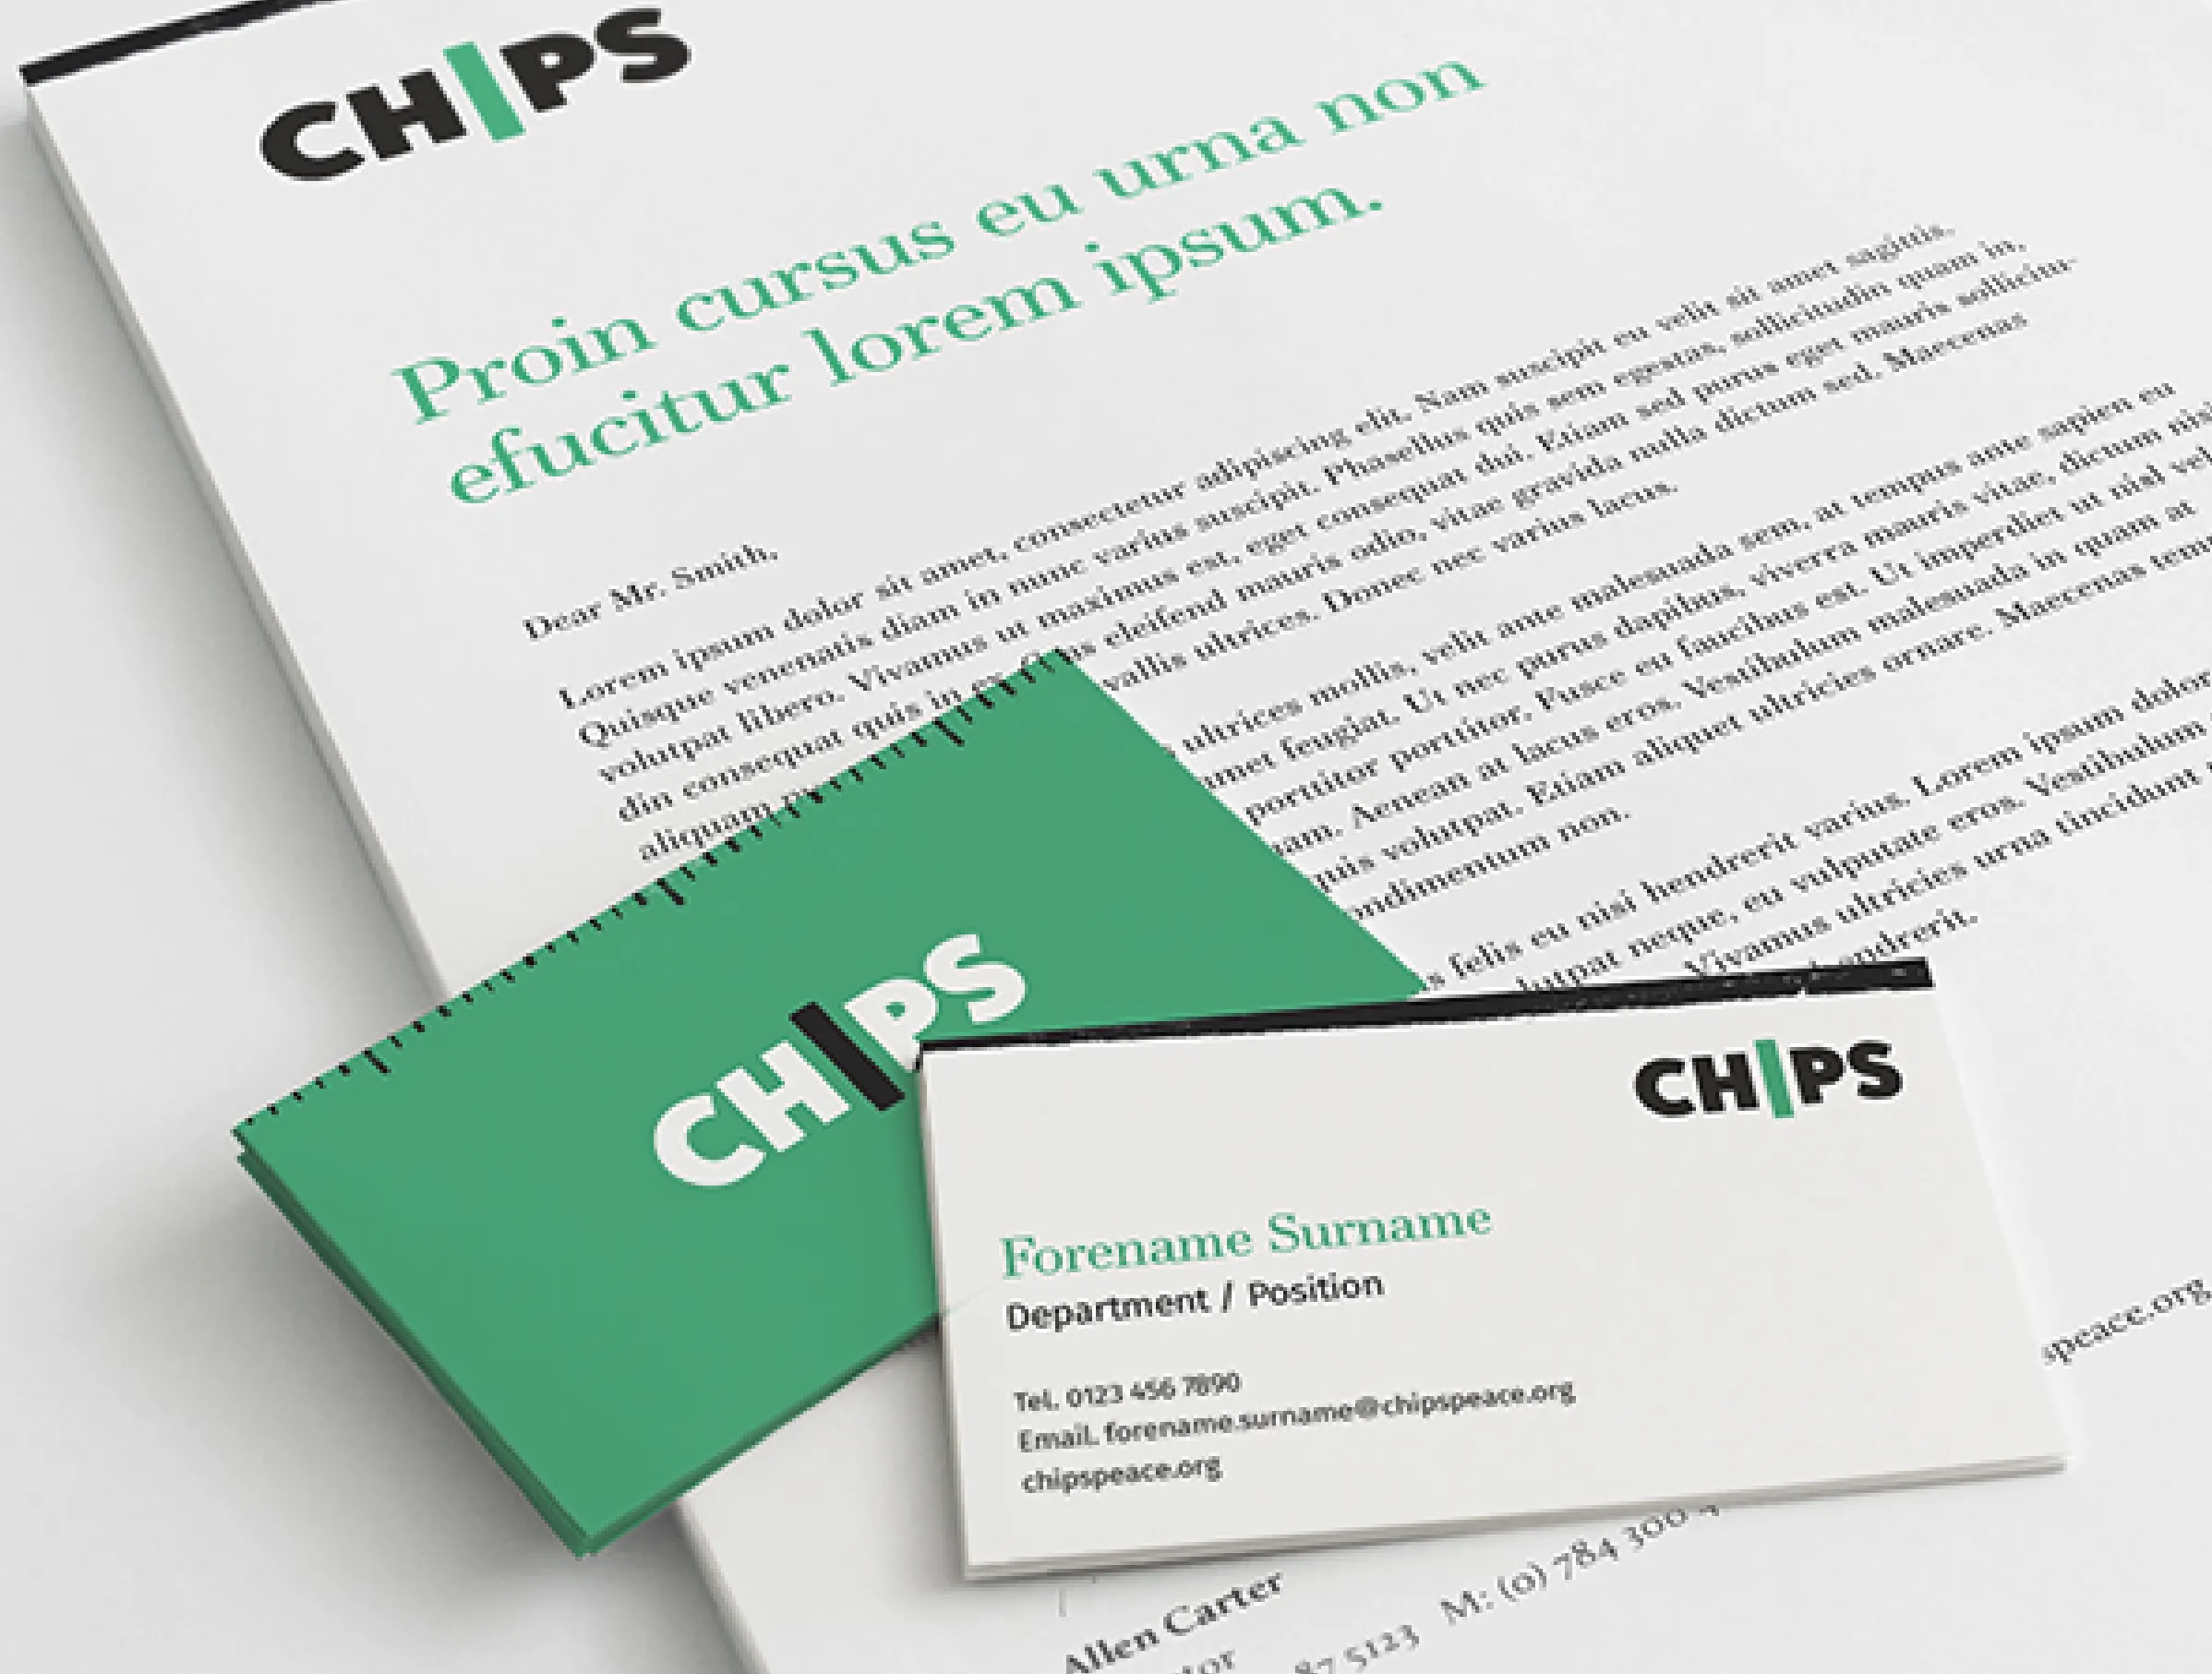 CHIPS charity brand shown on stationery and business cards